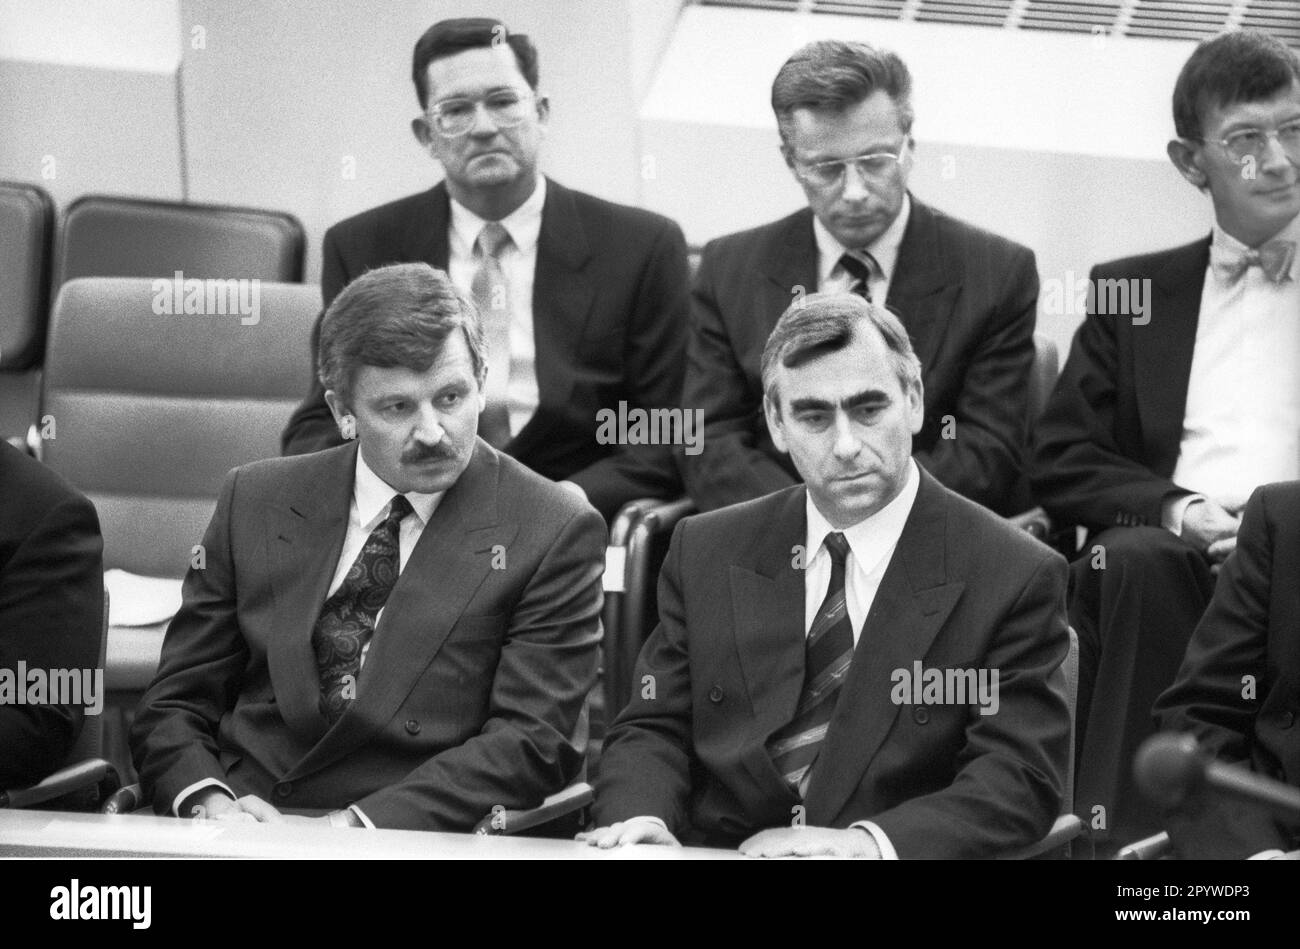 Germany, Bonn 18.01.1991 Archive No.: 24-47-10 Swearing-in ceremony of the federal ministers in the Bundestag Photo: from left to right: Carl-Dieter Spranger, Juergen Moellemann, Rainer Ortleb, Theo Waigel and Heinz Riesenhuber [automated translation] Stock Photo